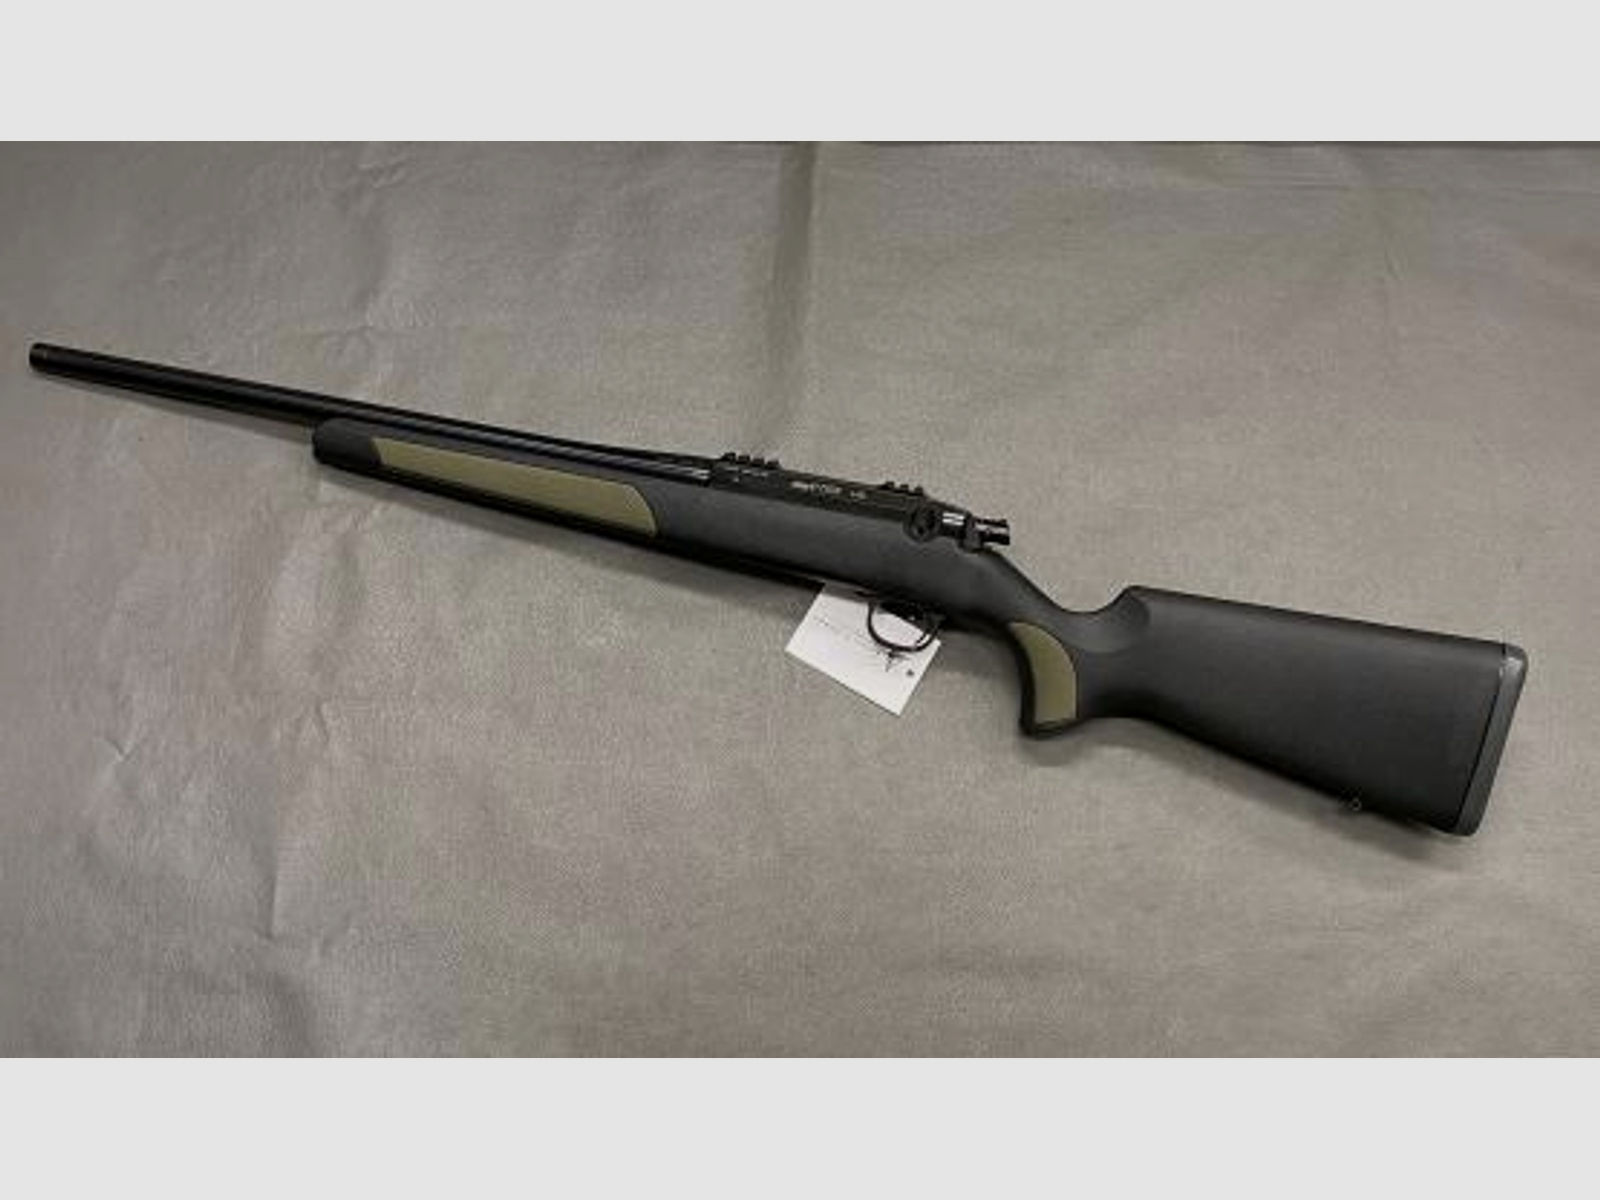 Steel Action "Hunting Short" HS .308Win Synthetik 510mm 
                Steel Action "Hunting Short" HS .308 Win. 510mm Lauflänge